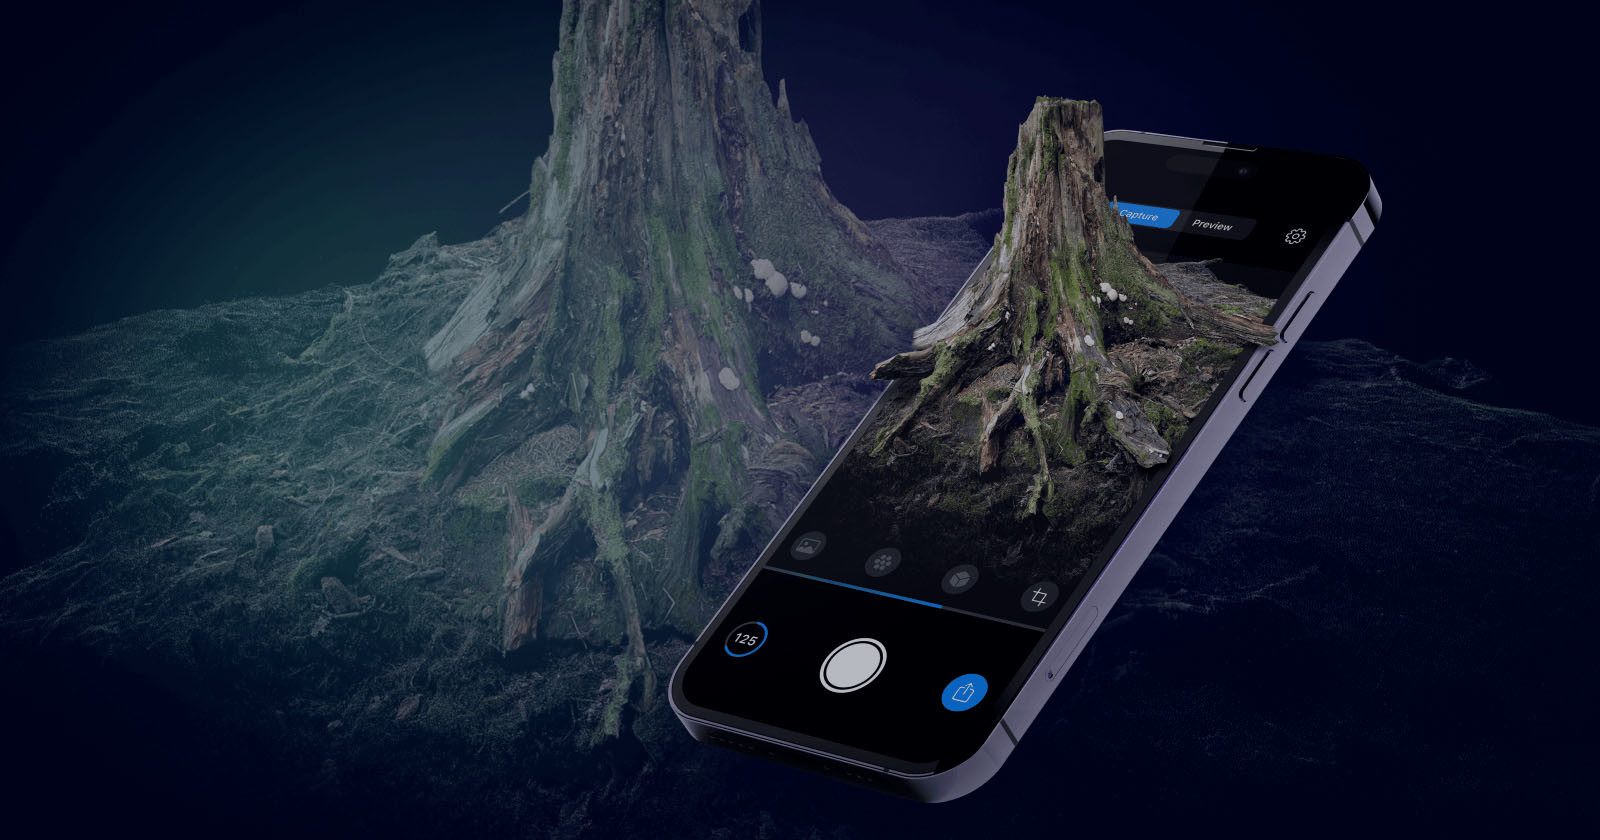 RealityScan App That Turns Photos into 3D Models is Now Available on iOS